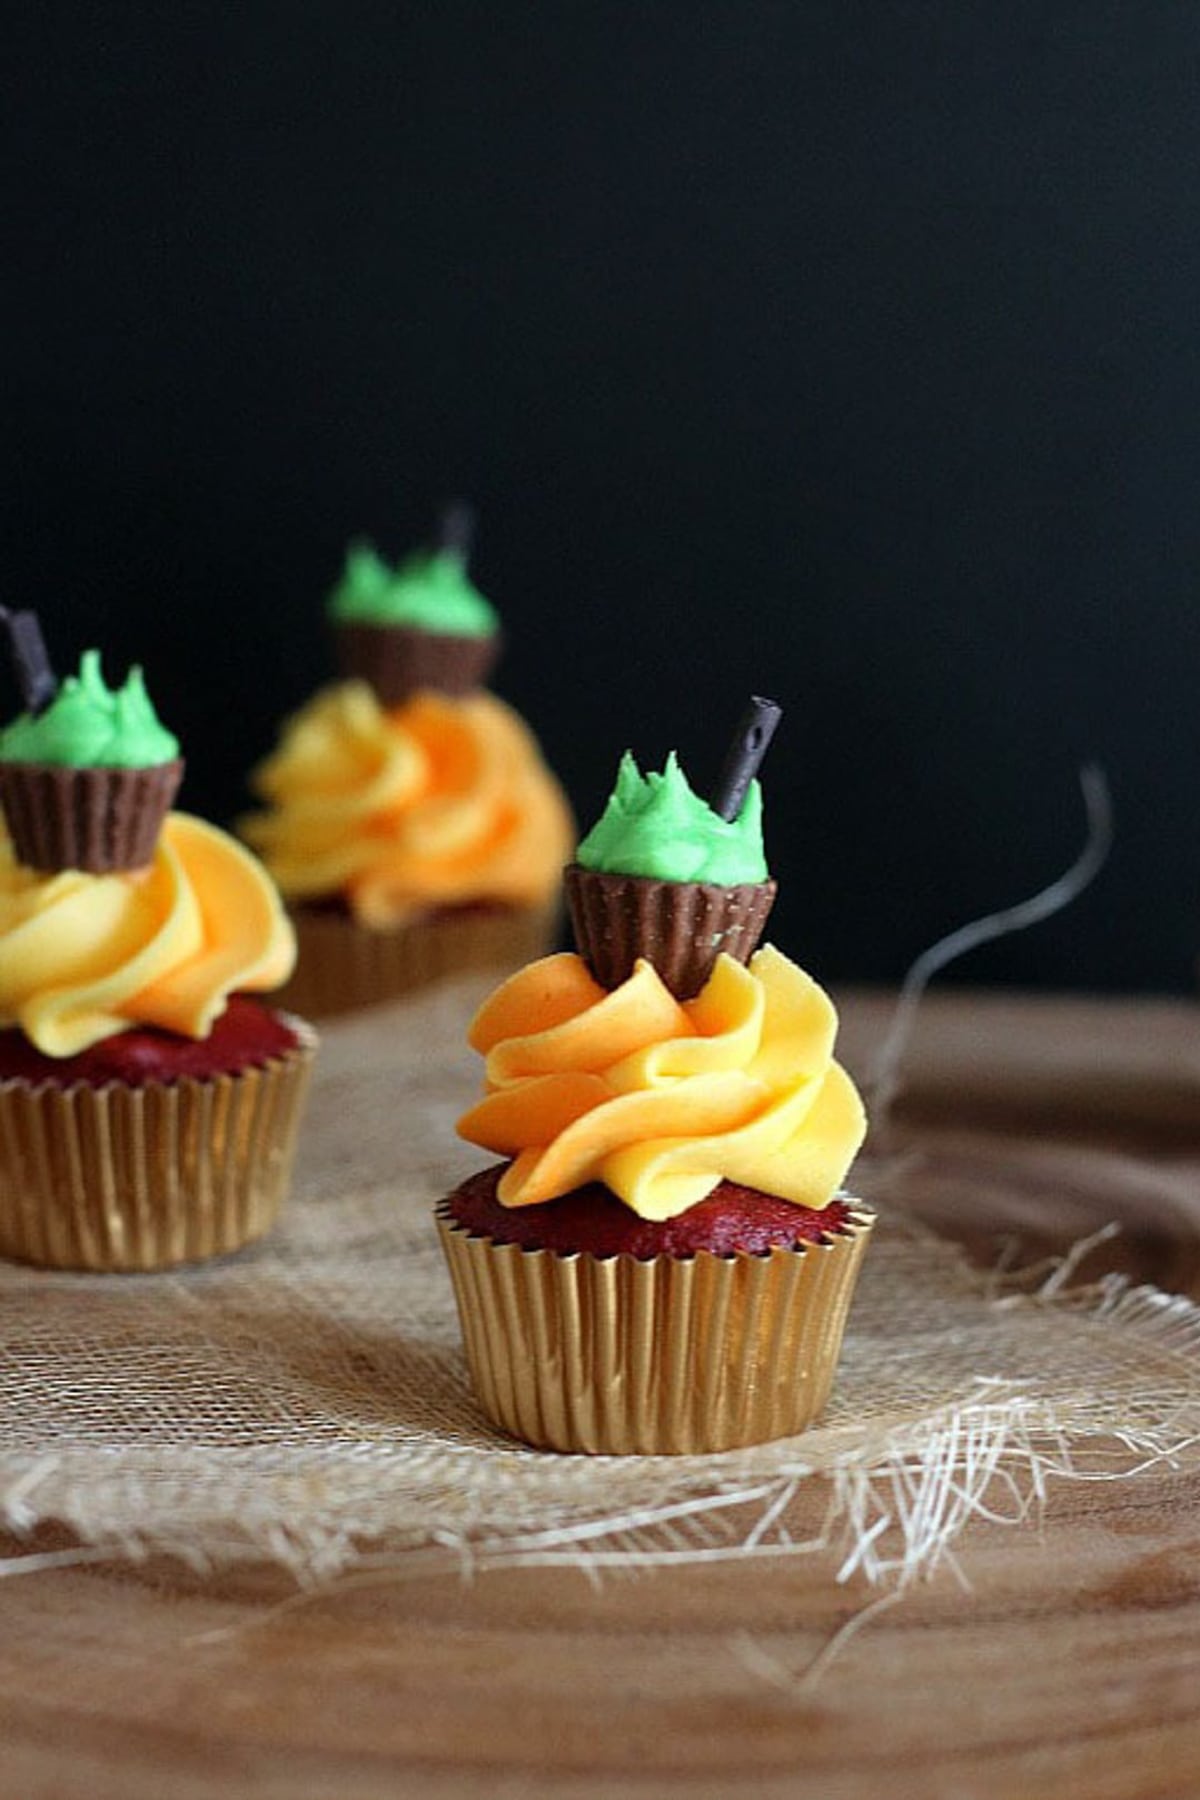 A red velvet cupcake topped with frosting to look like fire and a peanut butter cup cauldron